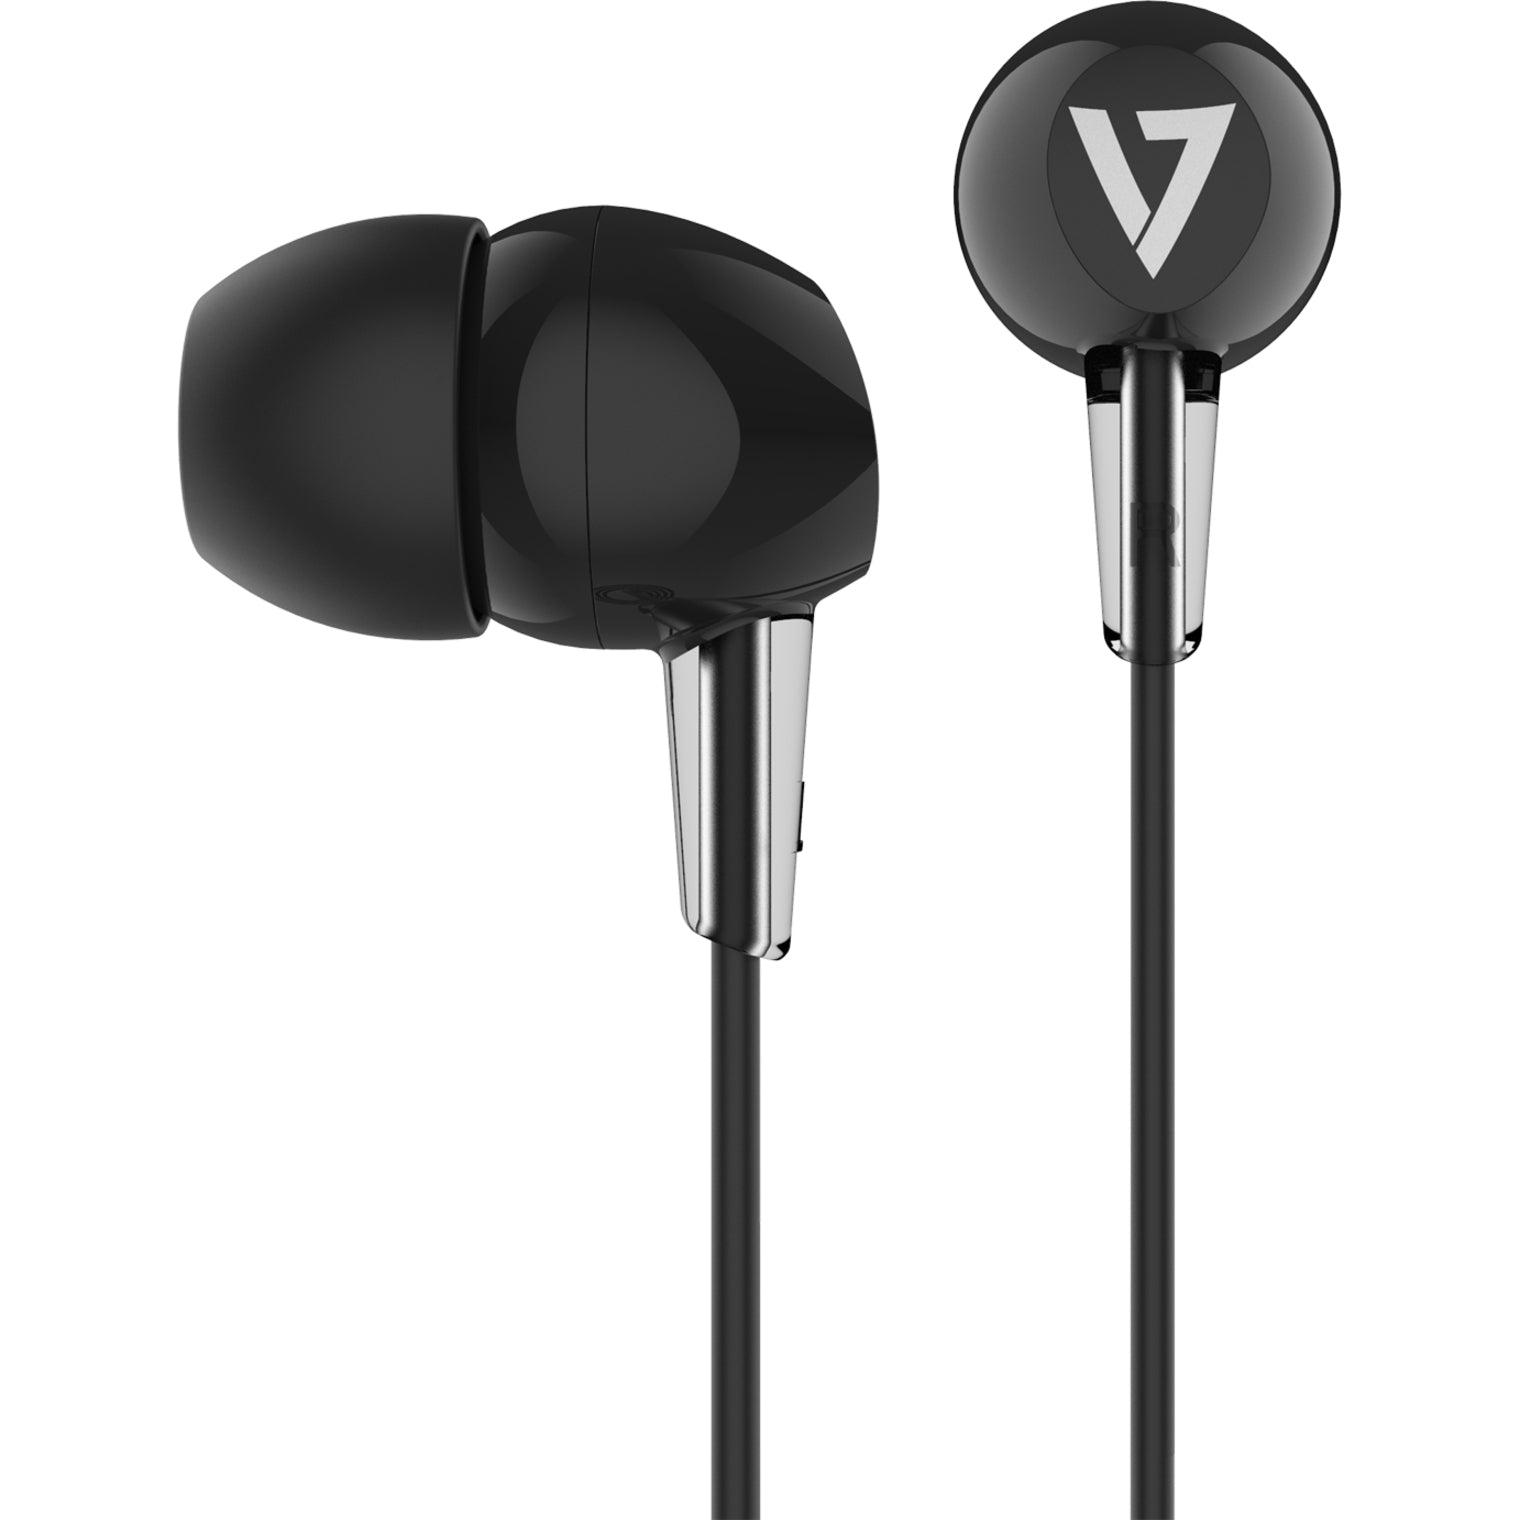 V7 HA200 3.5mm Noise Isolating Stereo Earbuds, Lightweight and Comfortable